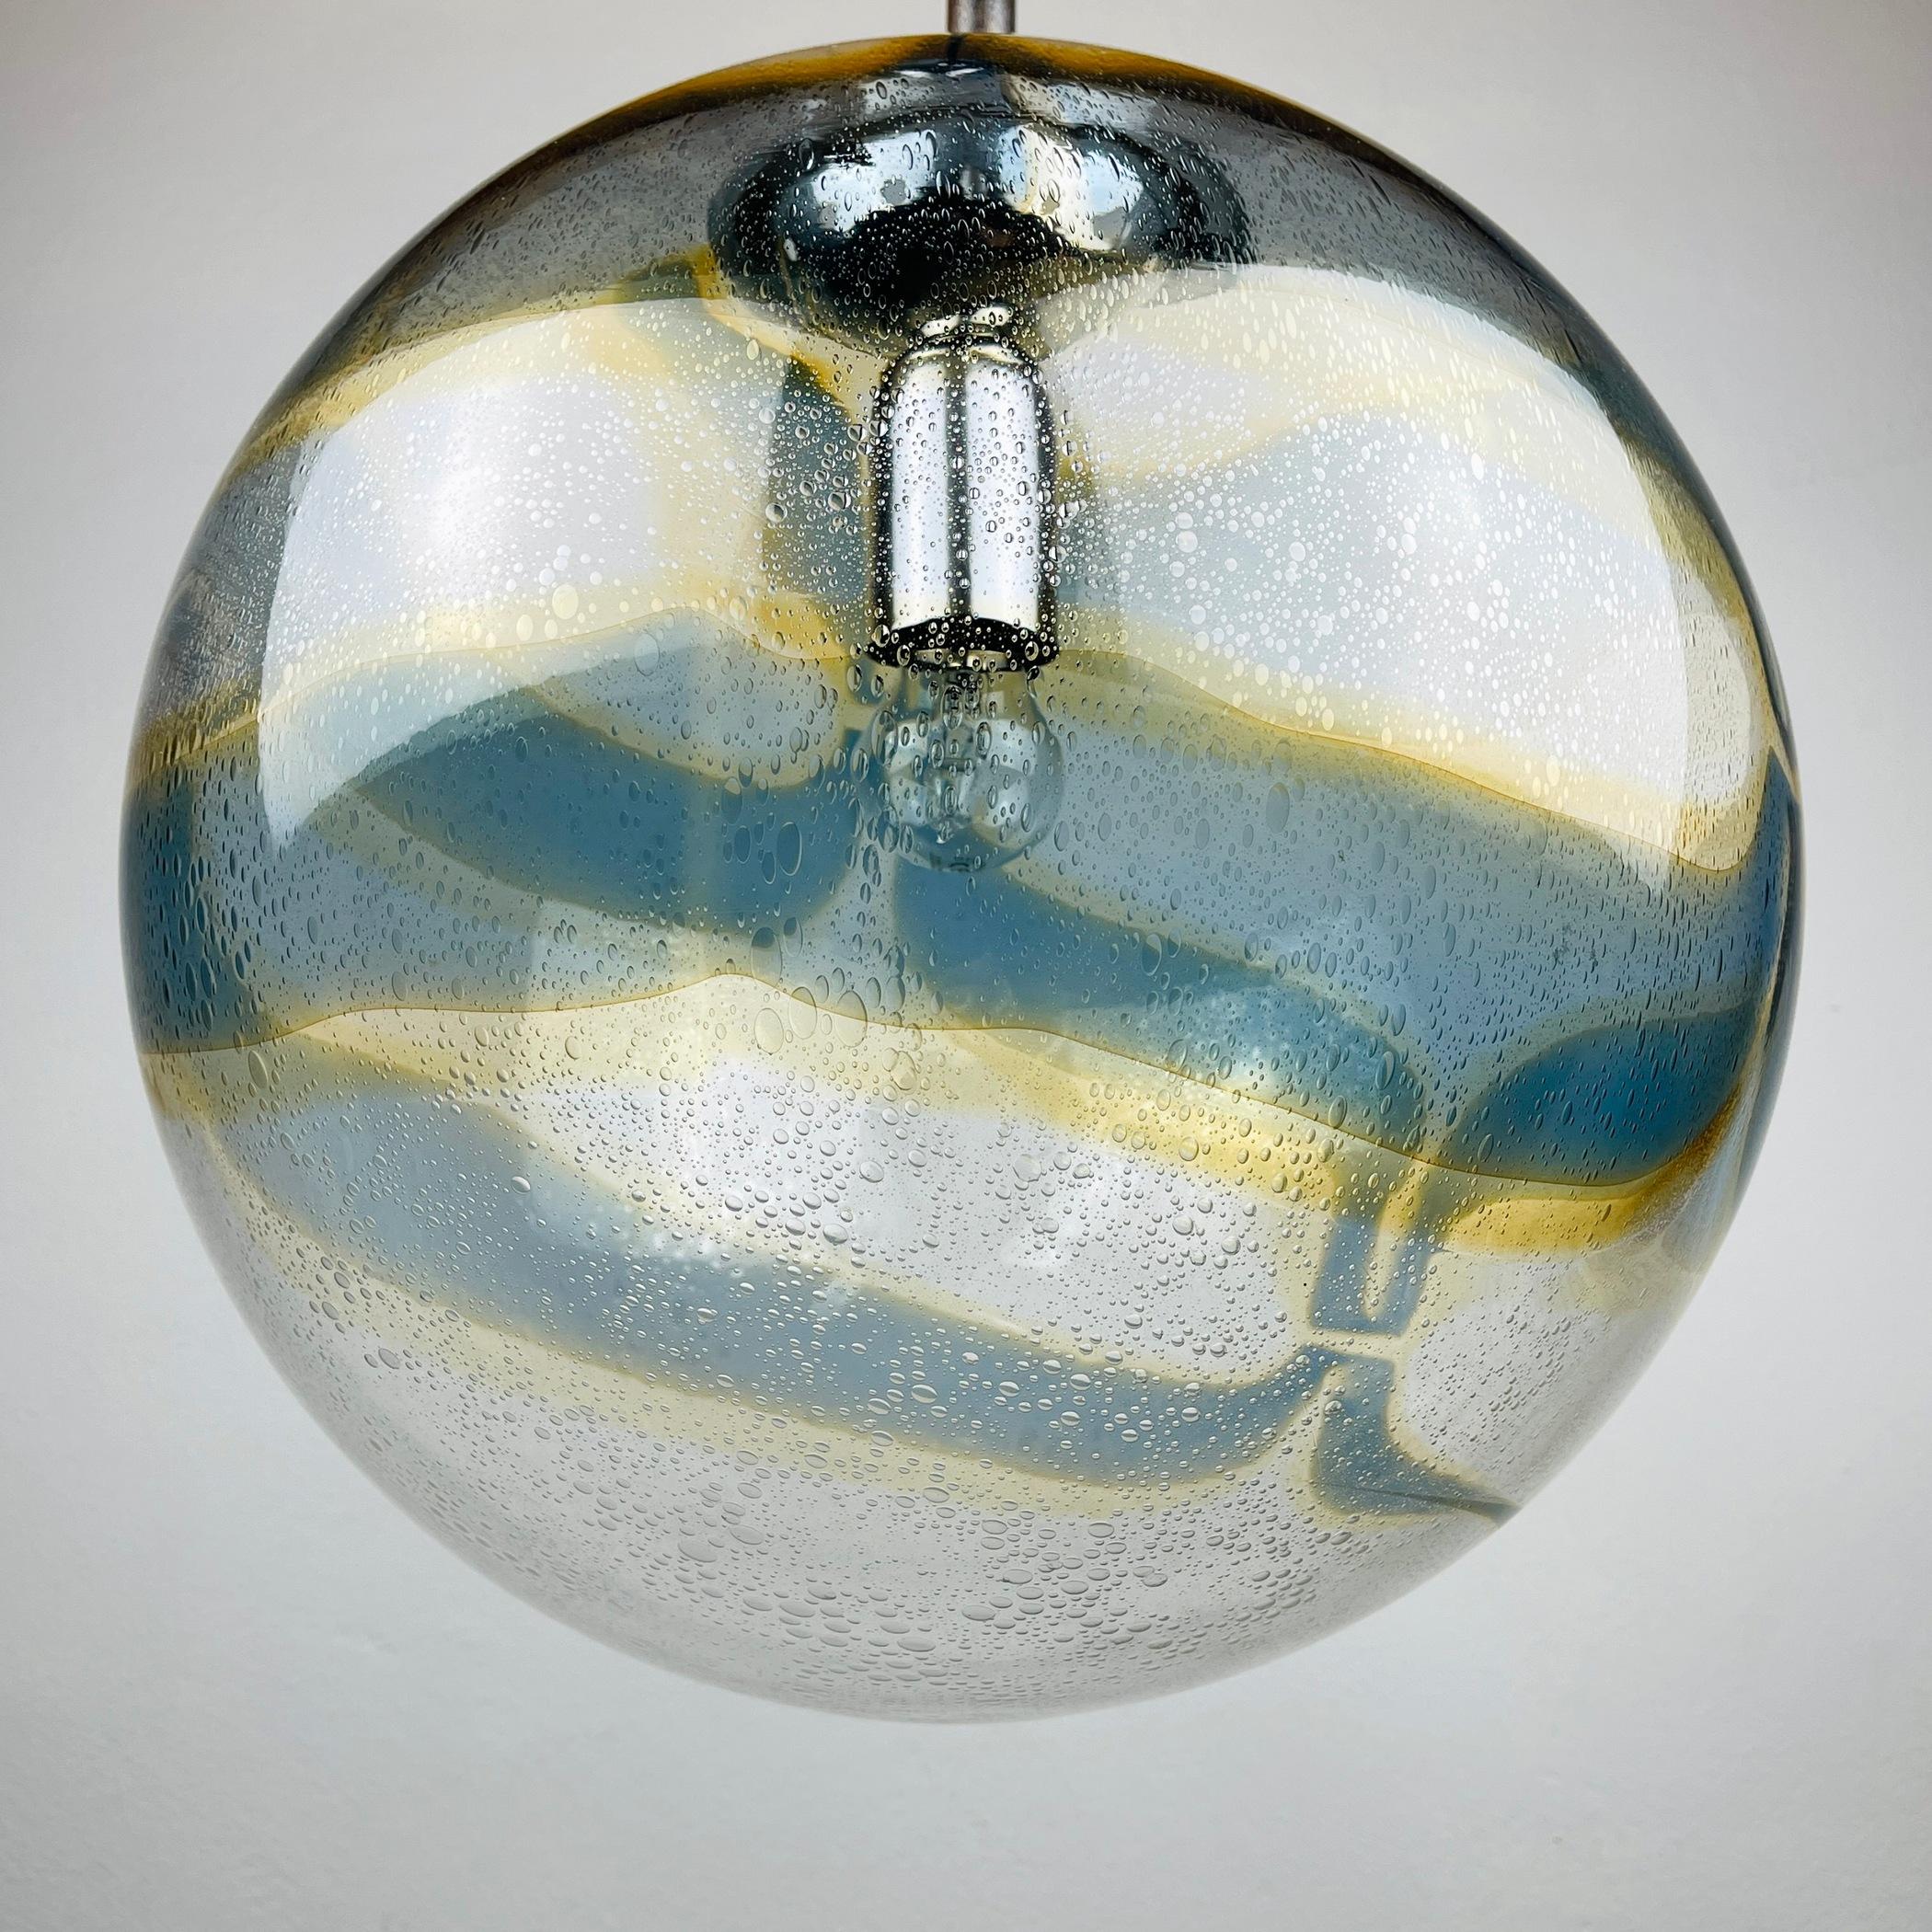 Vintage Xl Swirled Murano Glass Pendant Lamp by Vistosi Italy, 1970s For Sale 8